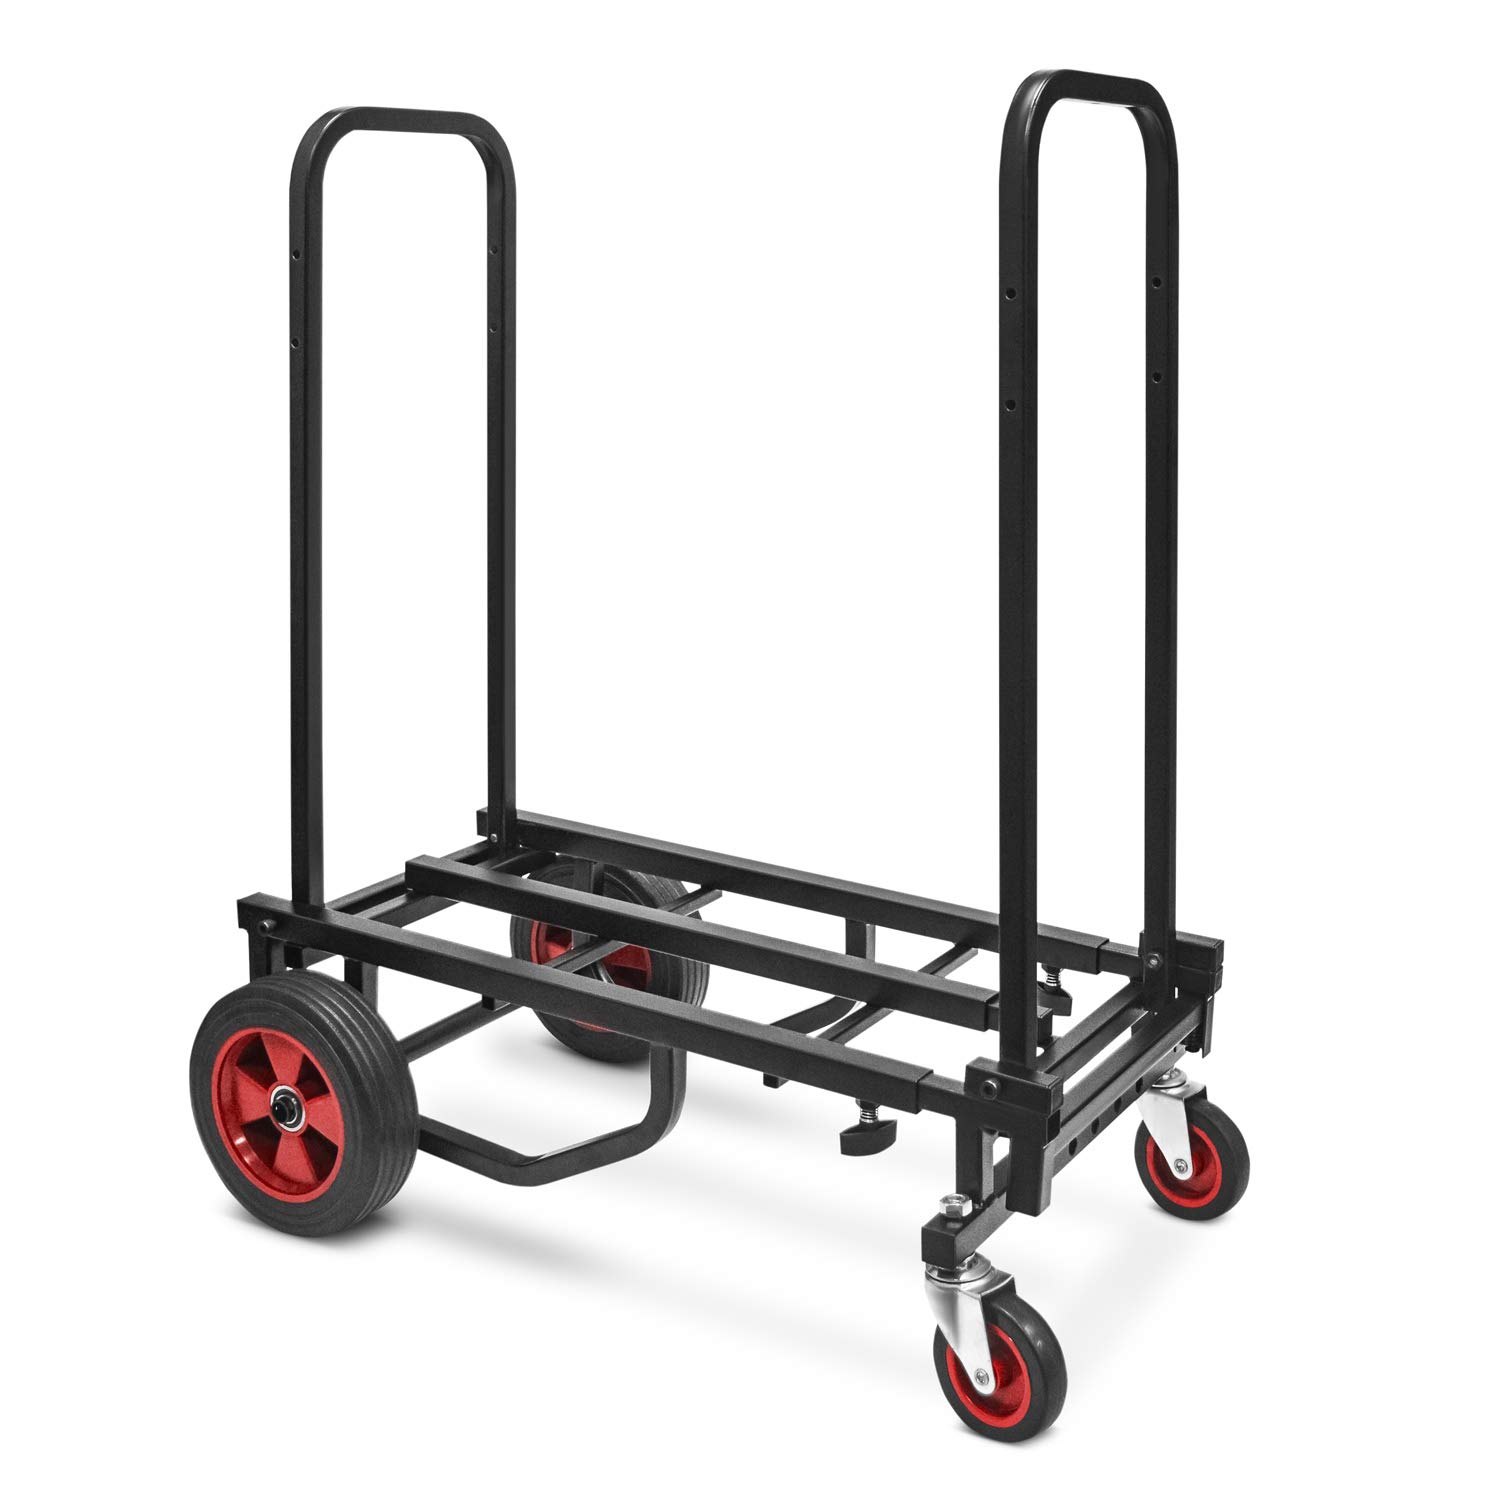 Pyle Adjustable Professional Equipment Cart - Compact 8-in-1 Folding Multi-Cart, Hand Truck/Dolly/Platform Cart